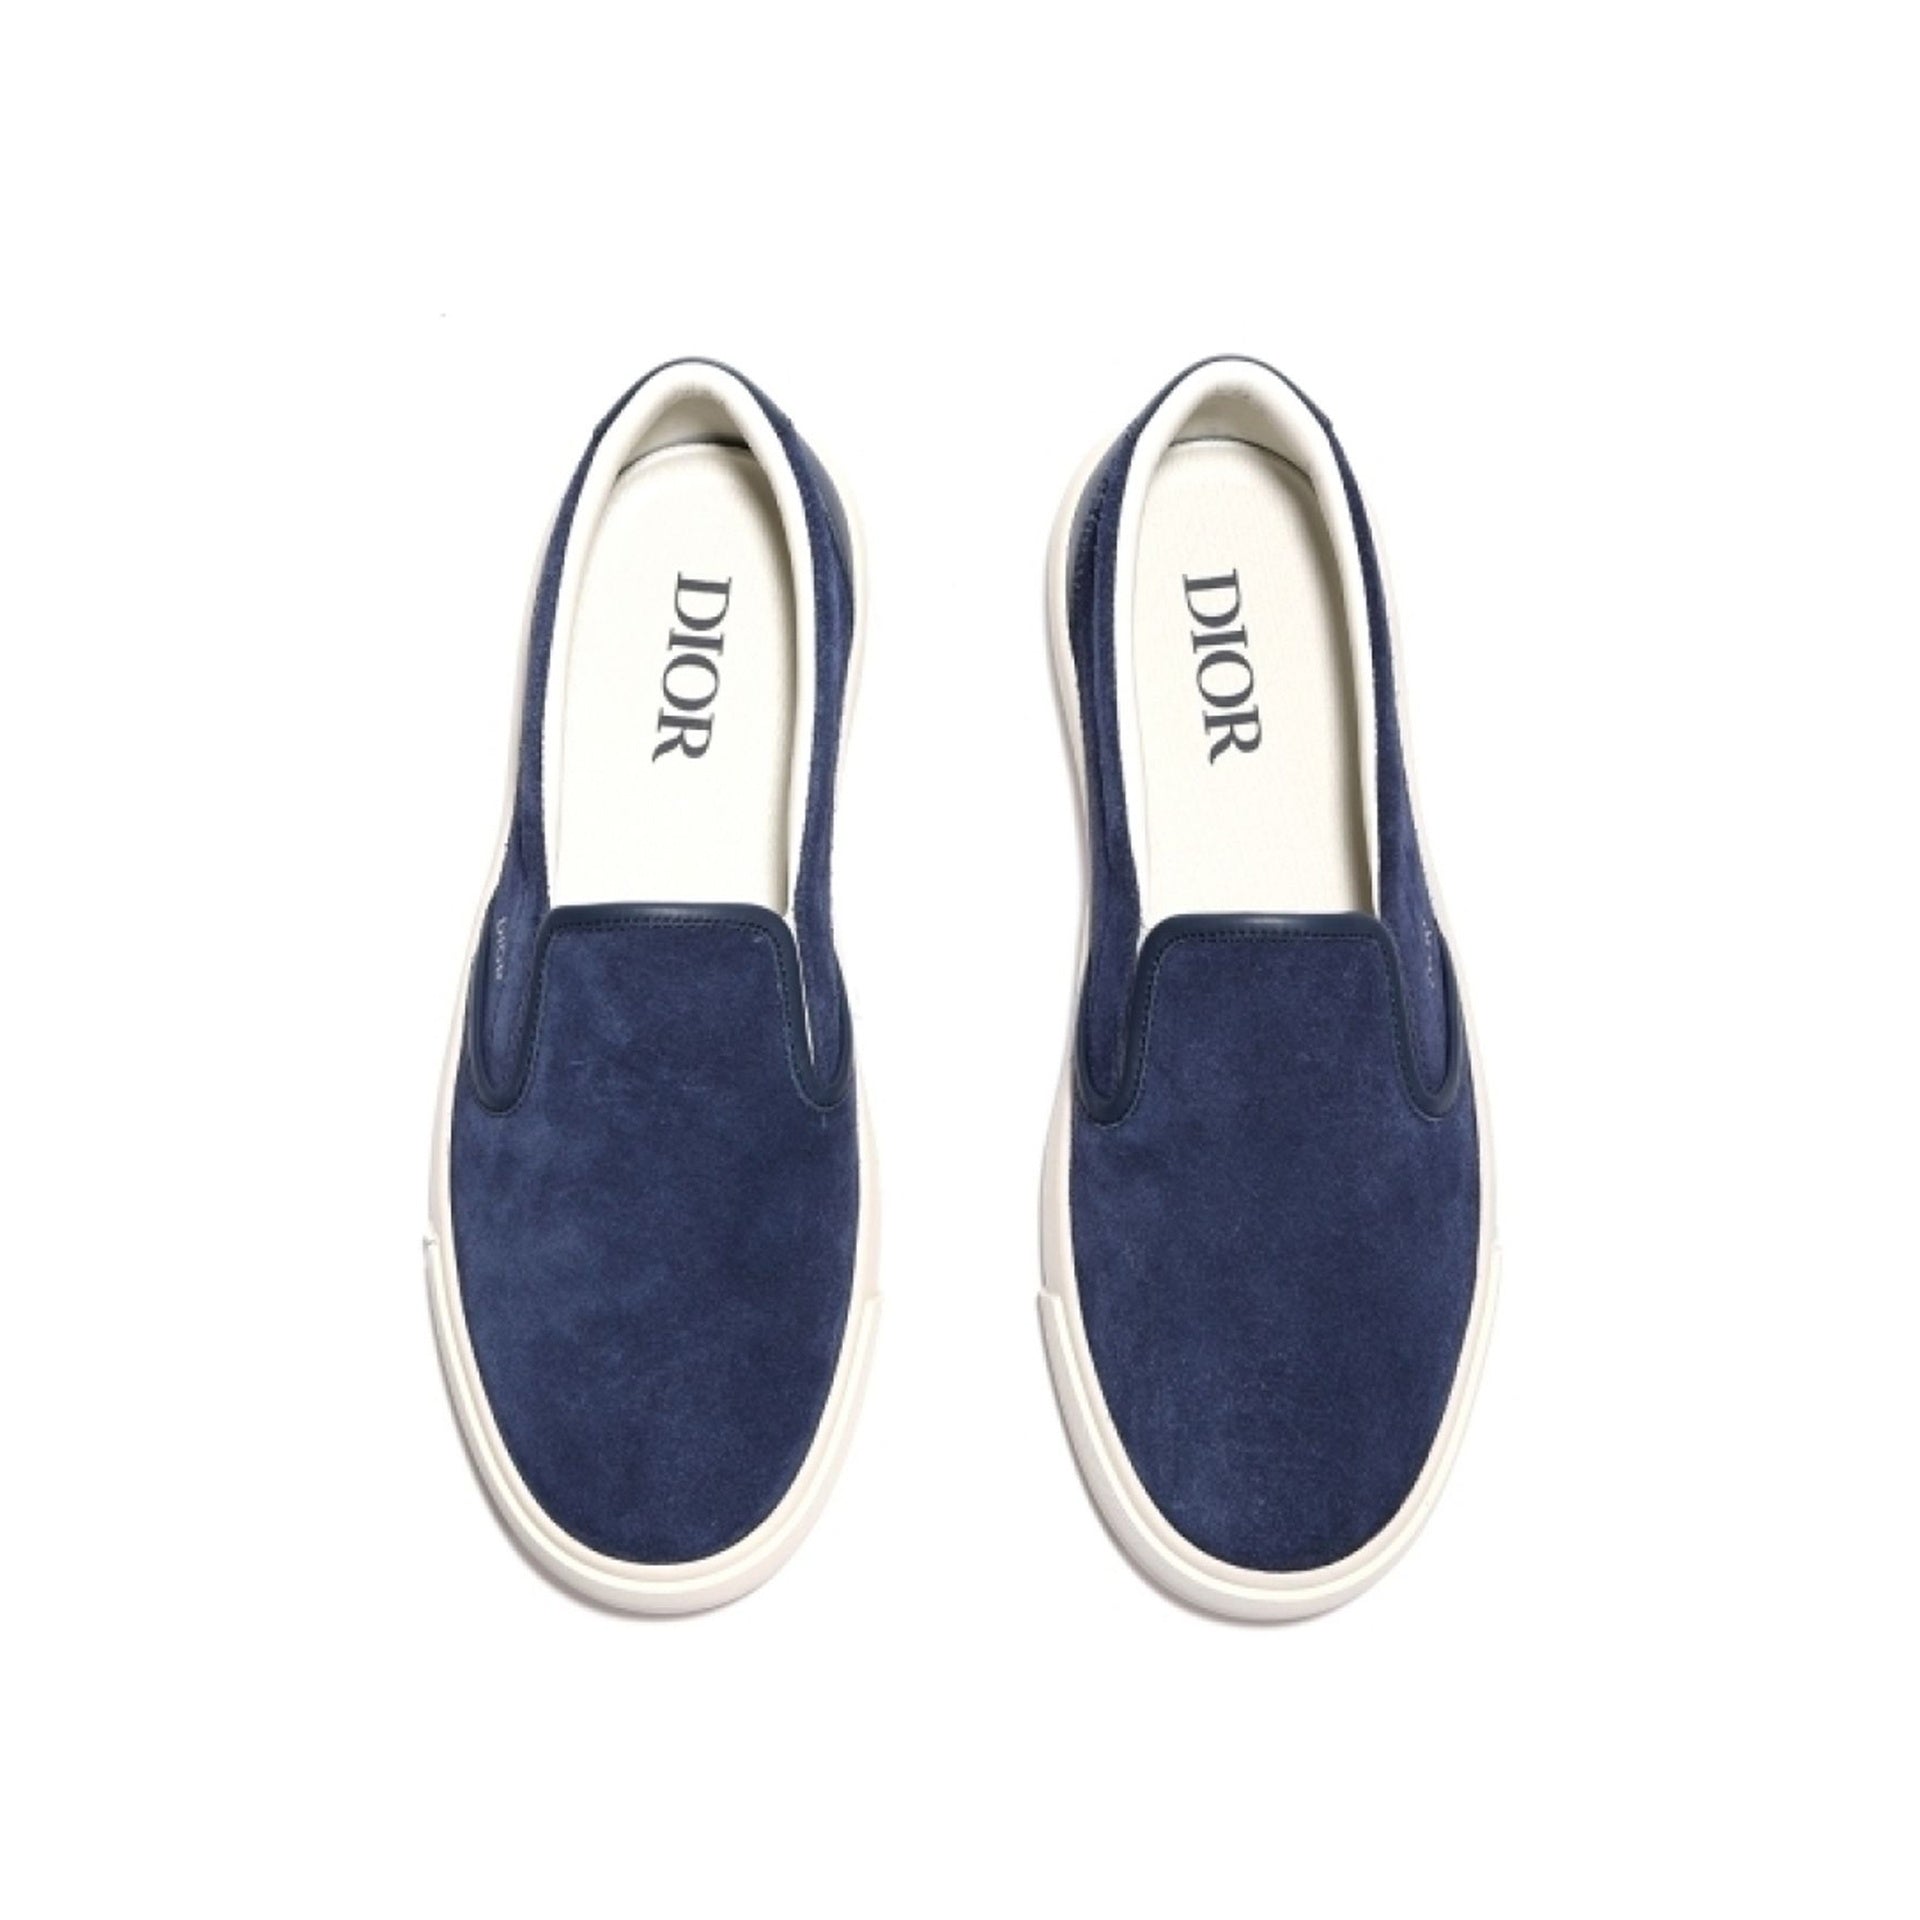 Dior Leather Slip-On Sneakers